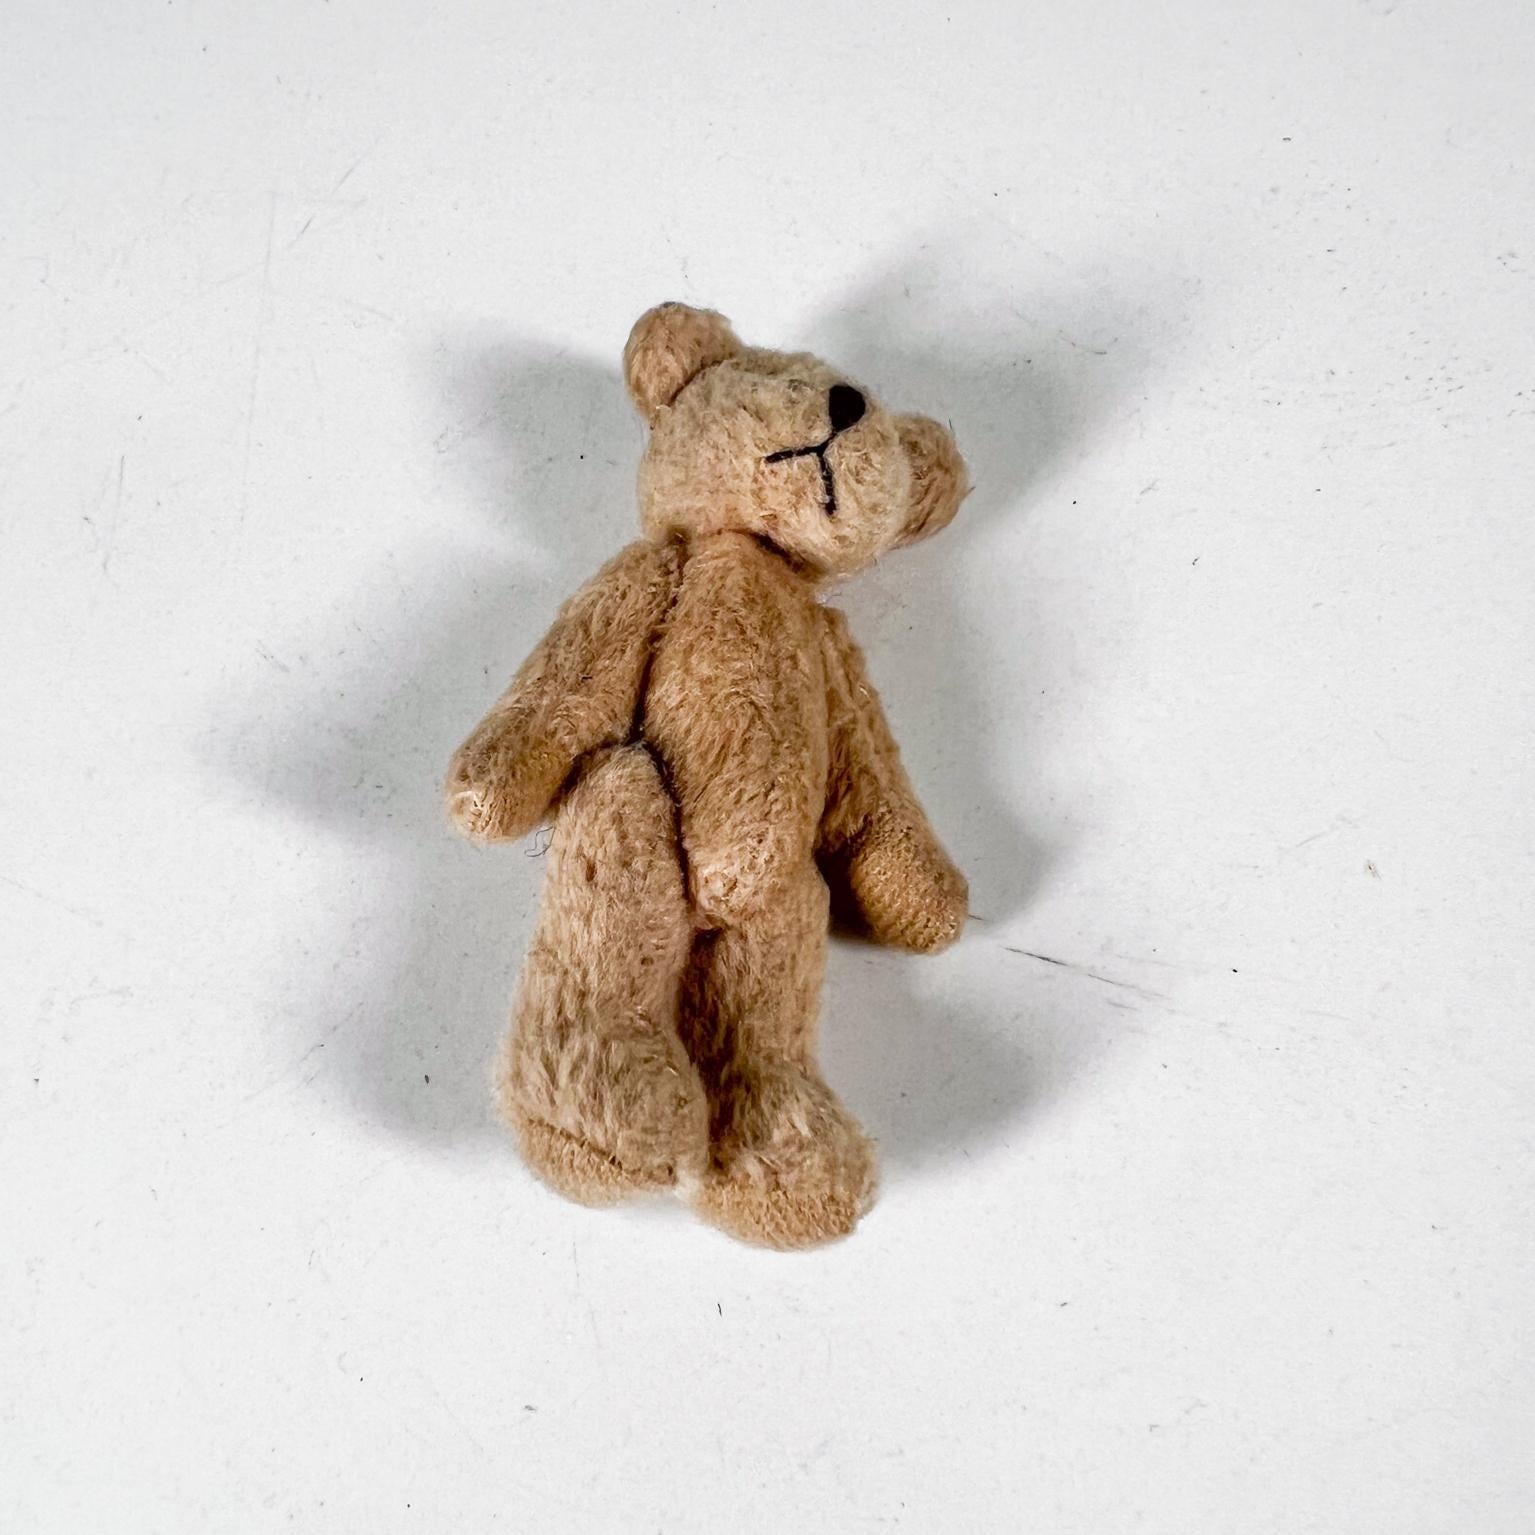 Precious Vintage Tiny Baby Teddy Bear
jointed, soft and huggable
3 h x 1.75 w x .88 d
Preloved vintage condition unrestored
Review all images provided.